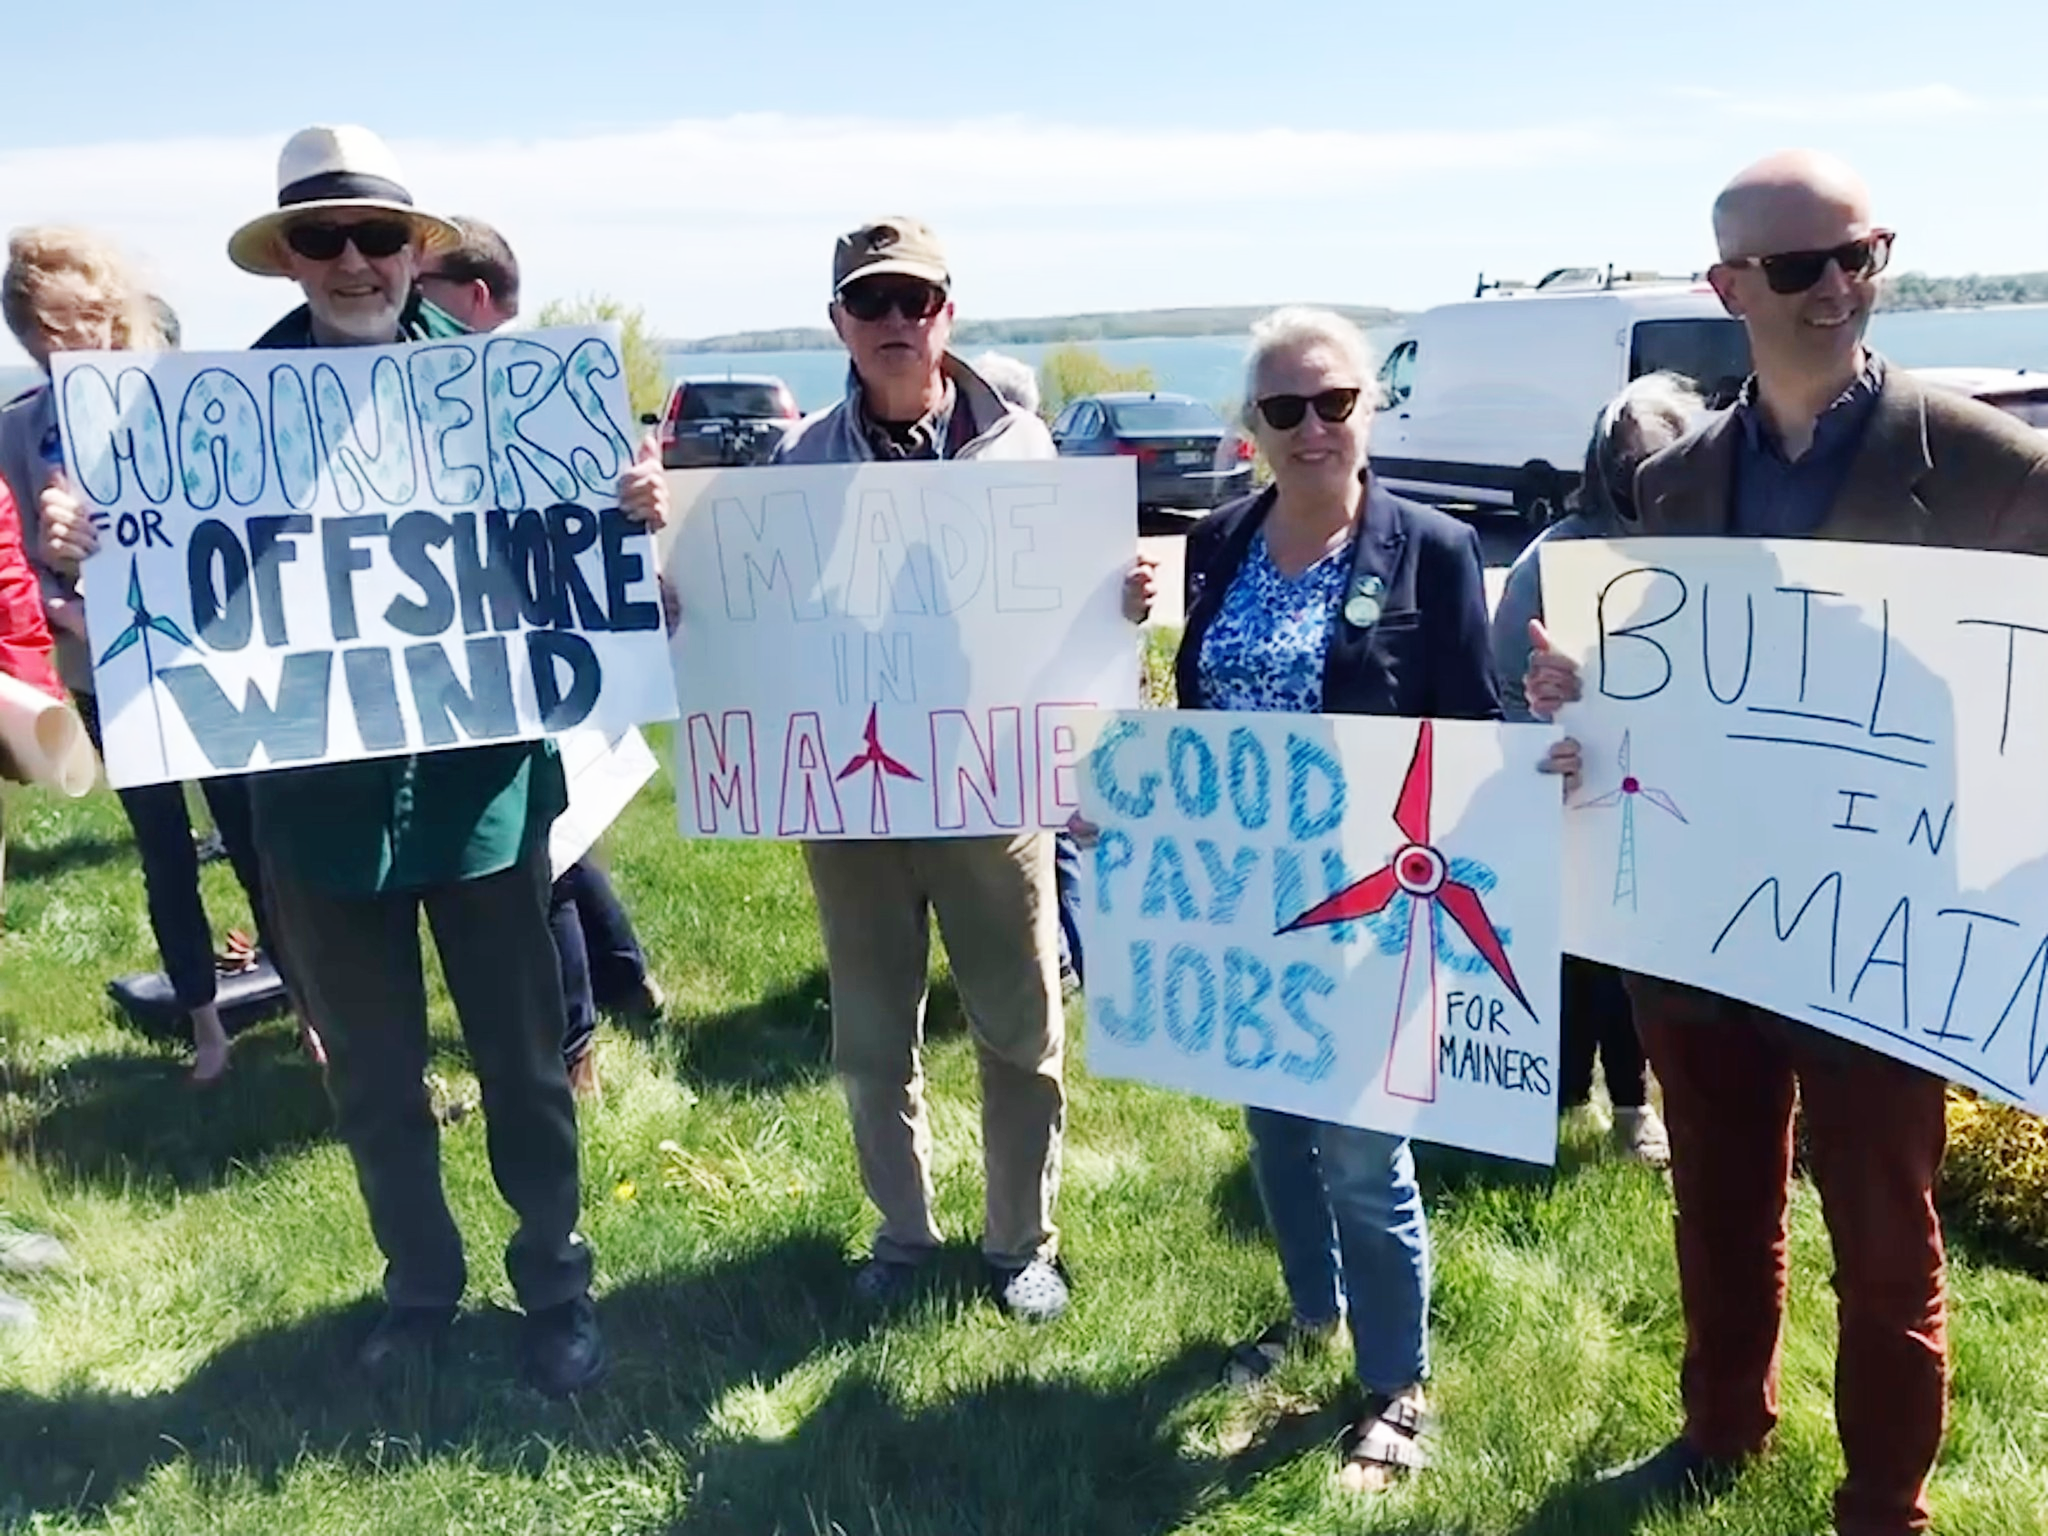 People outside holding signs in support of offshore wind